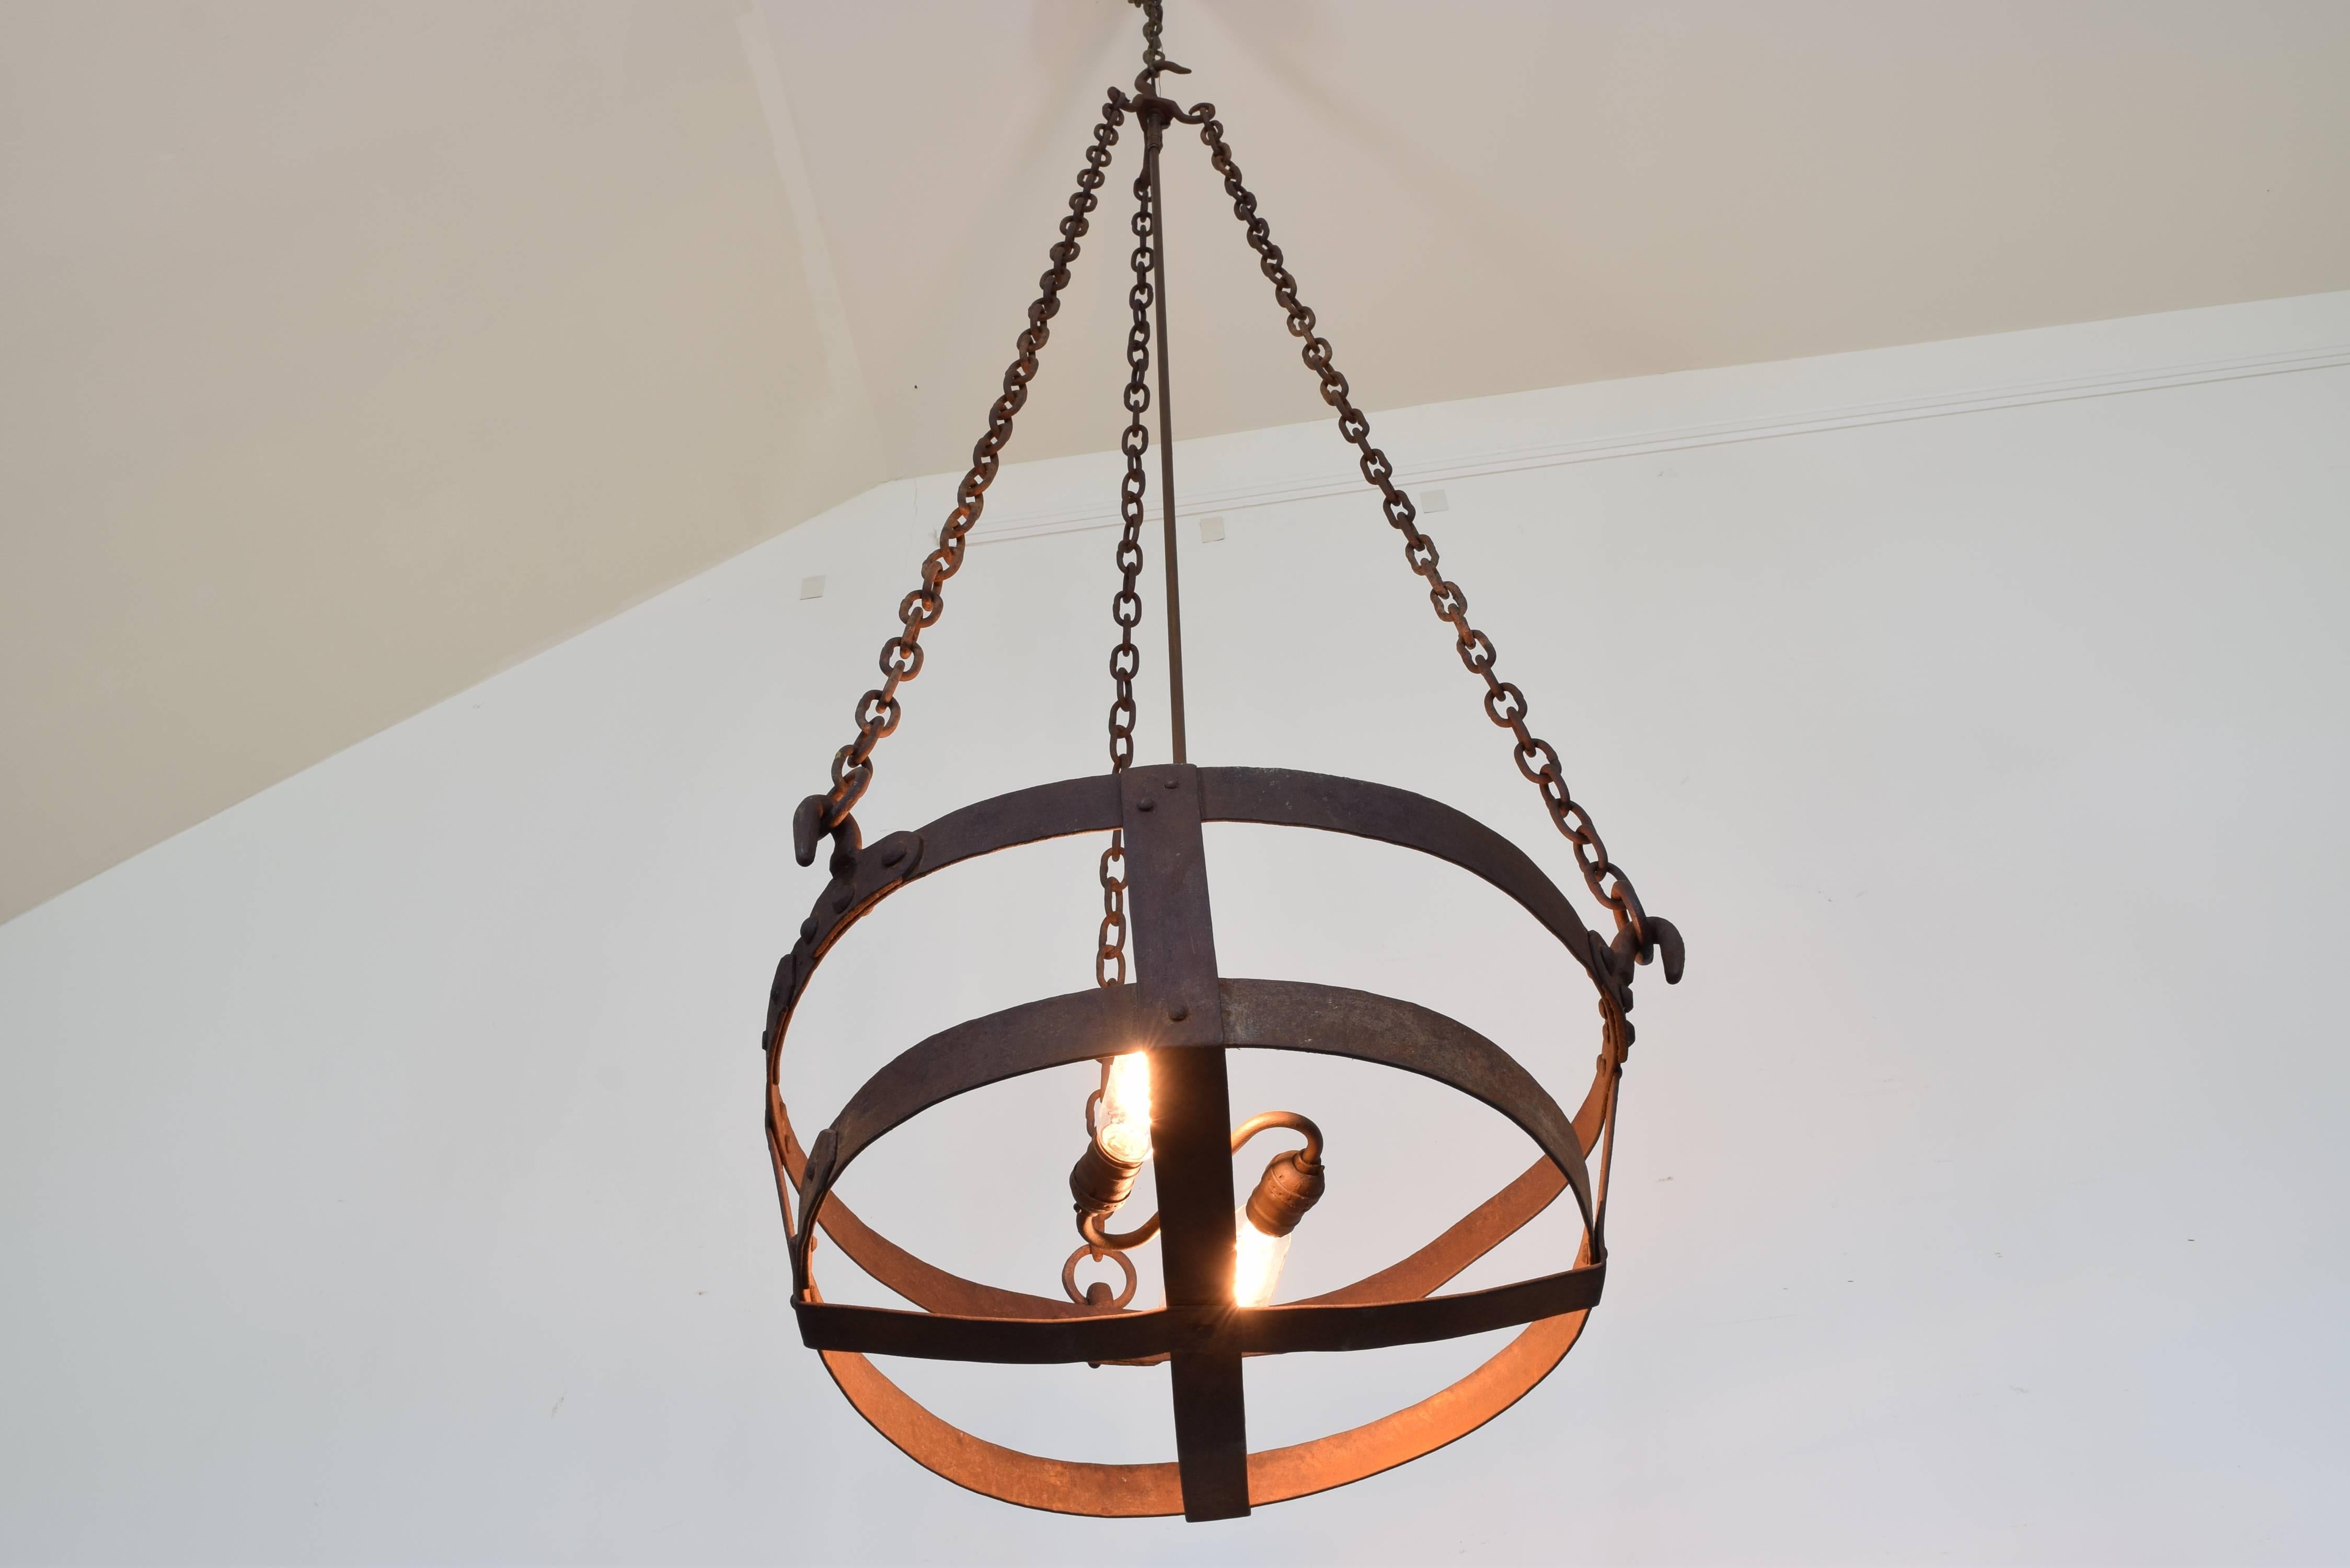 Hanging from three long chains, the open basket now illuminated with a two-light socket.